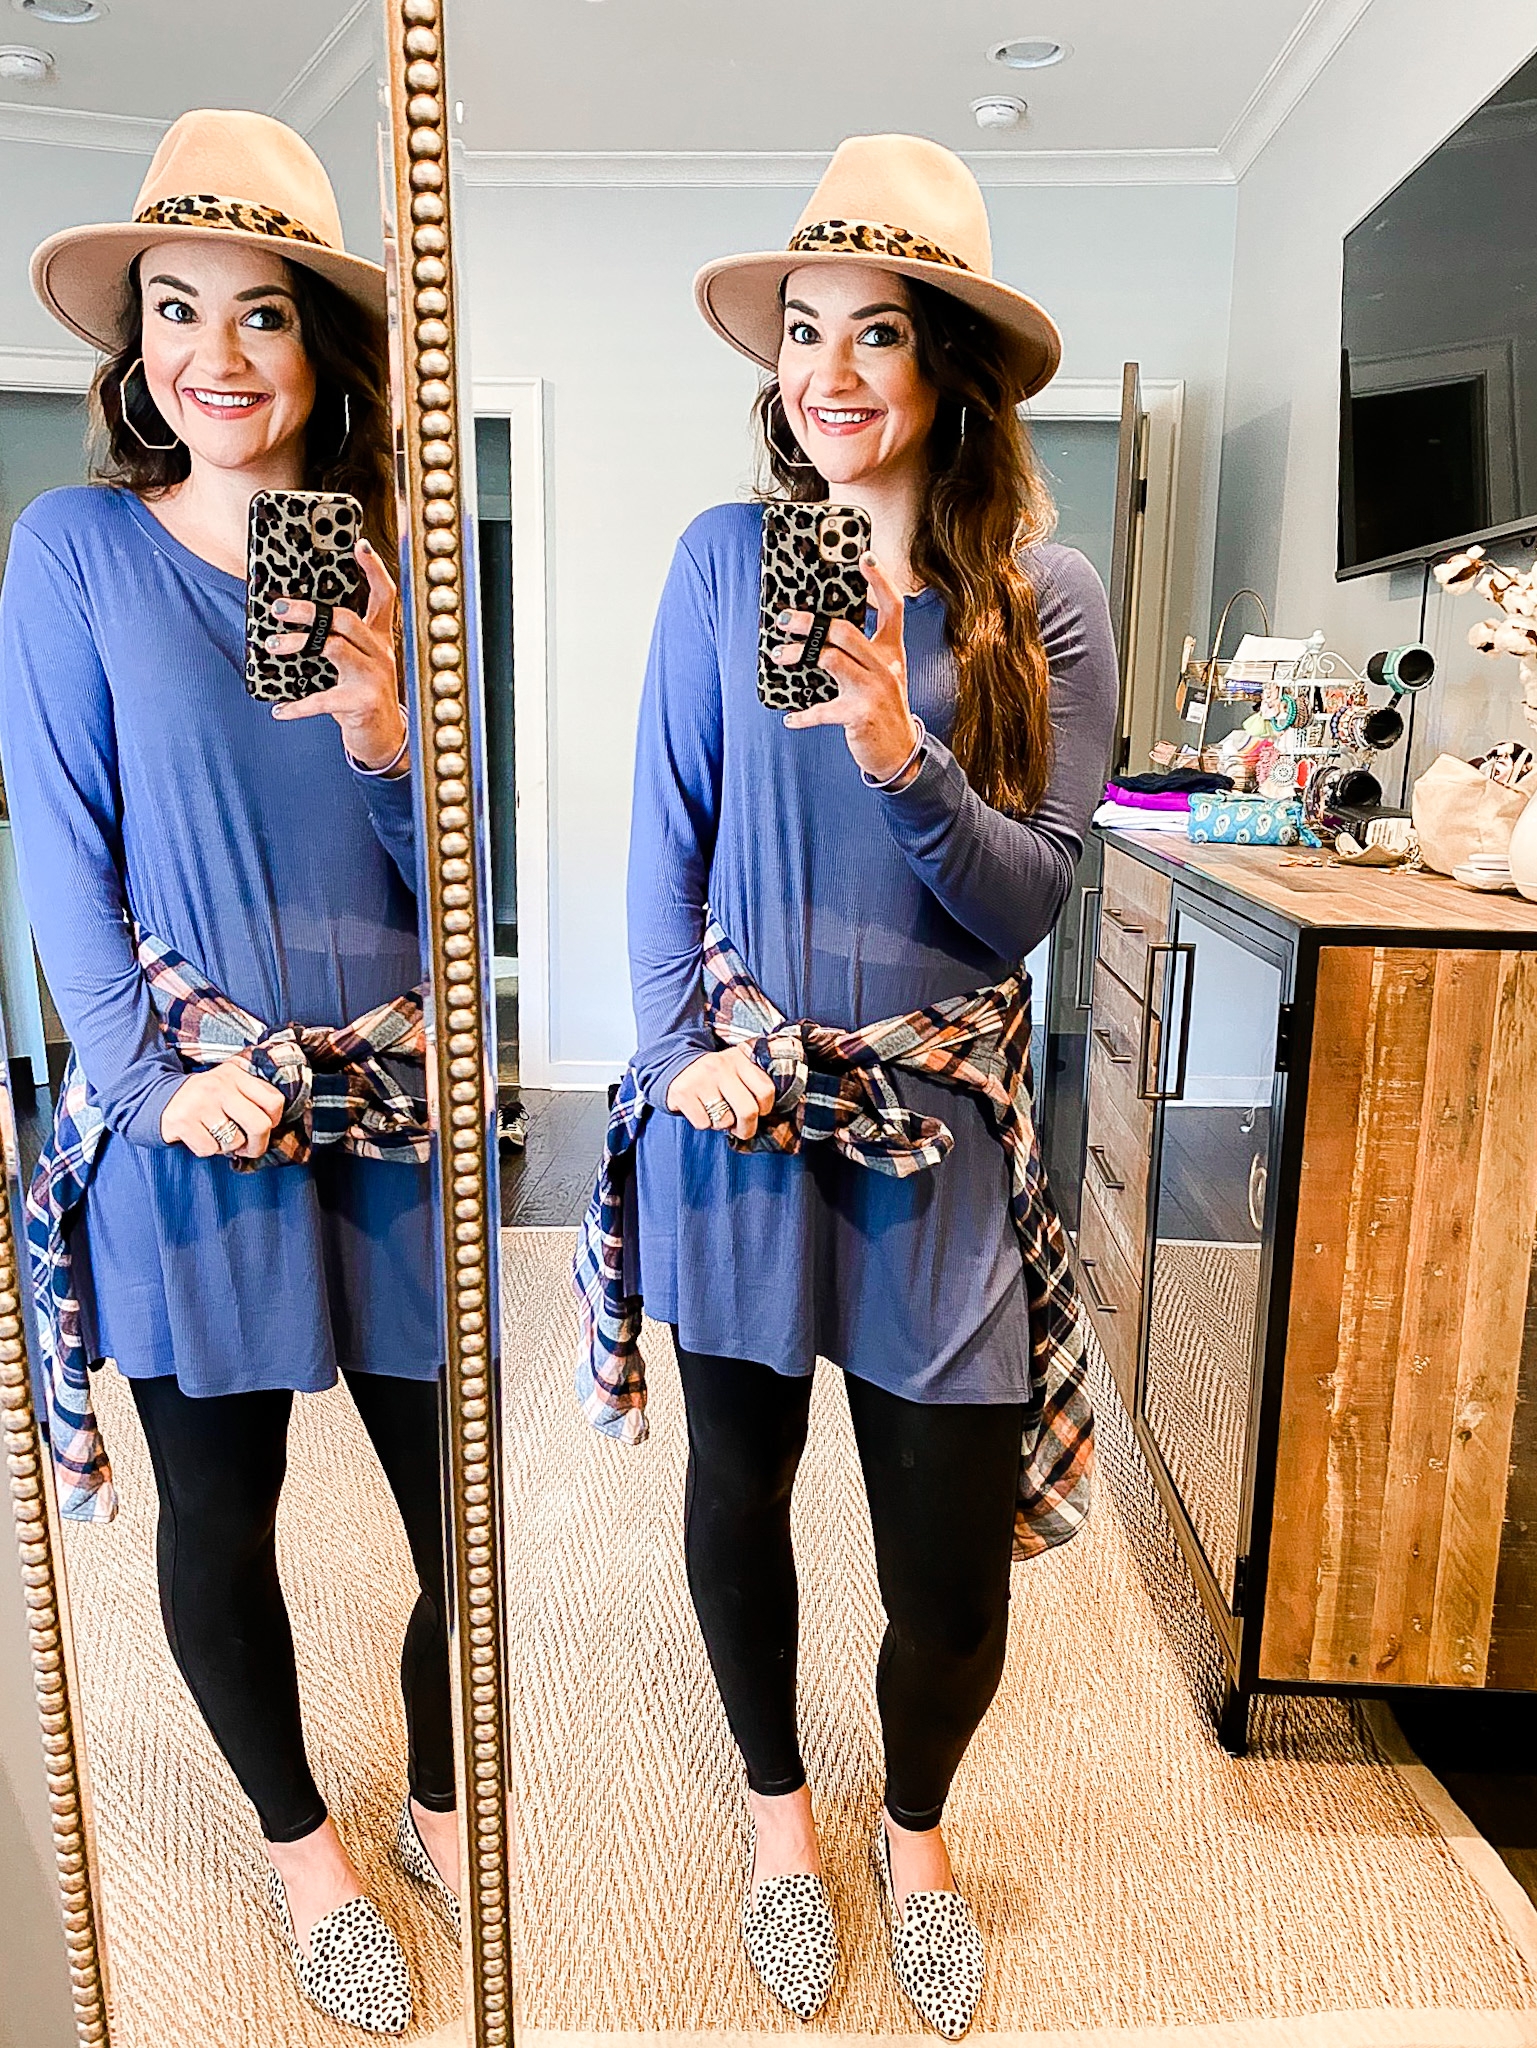 Top 27 Best Tops To Wear With Leggings This Fall - Healthy By